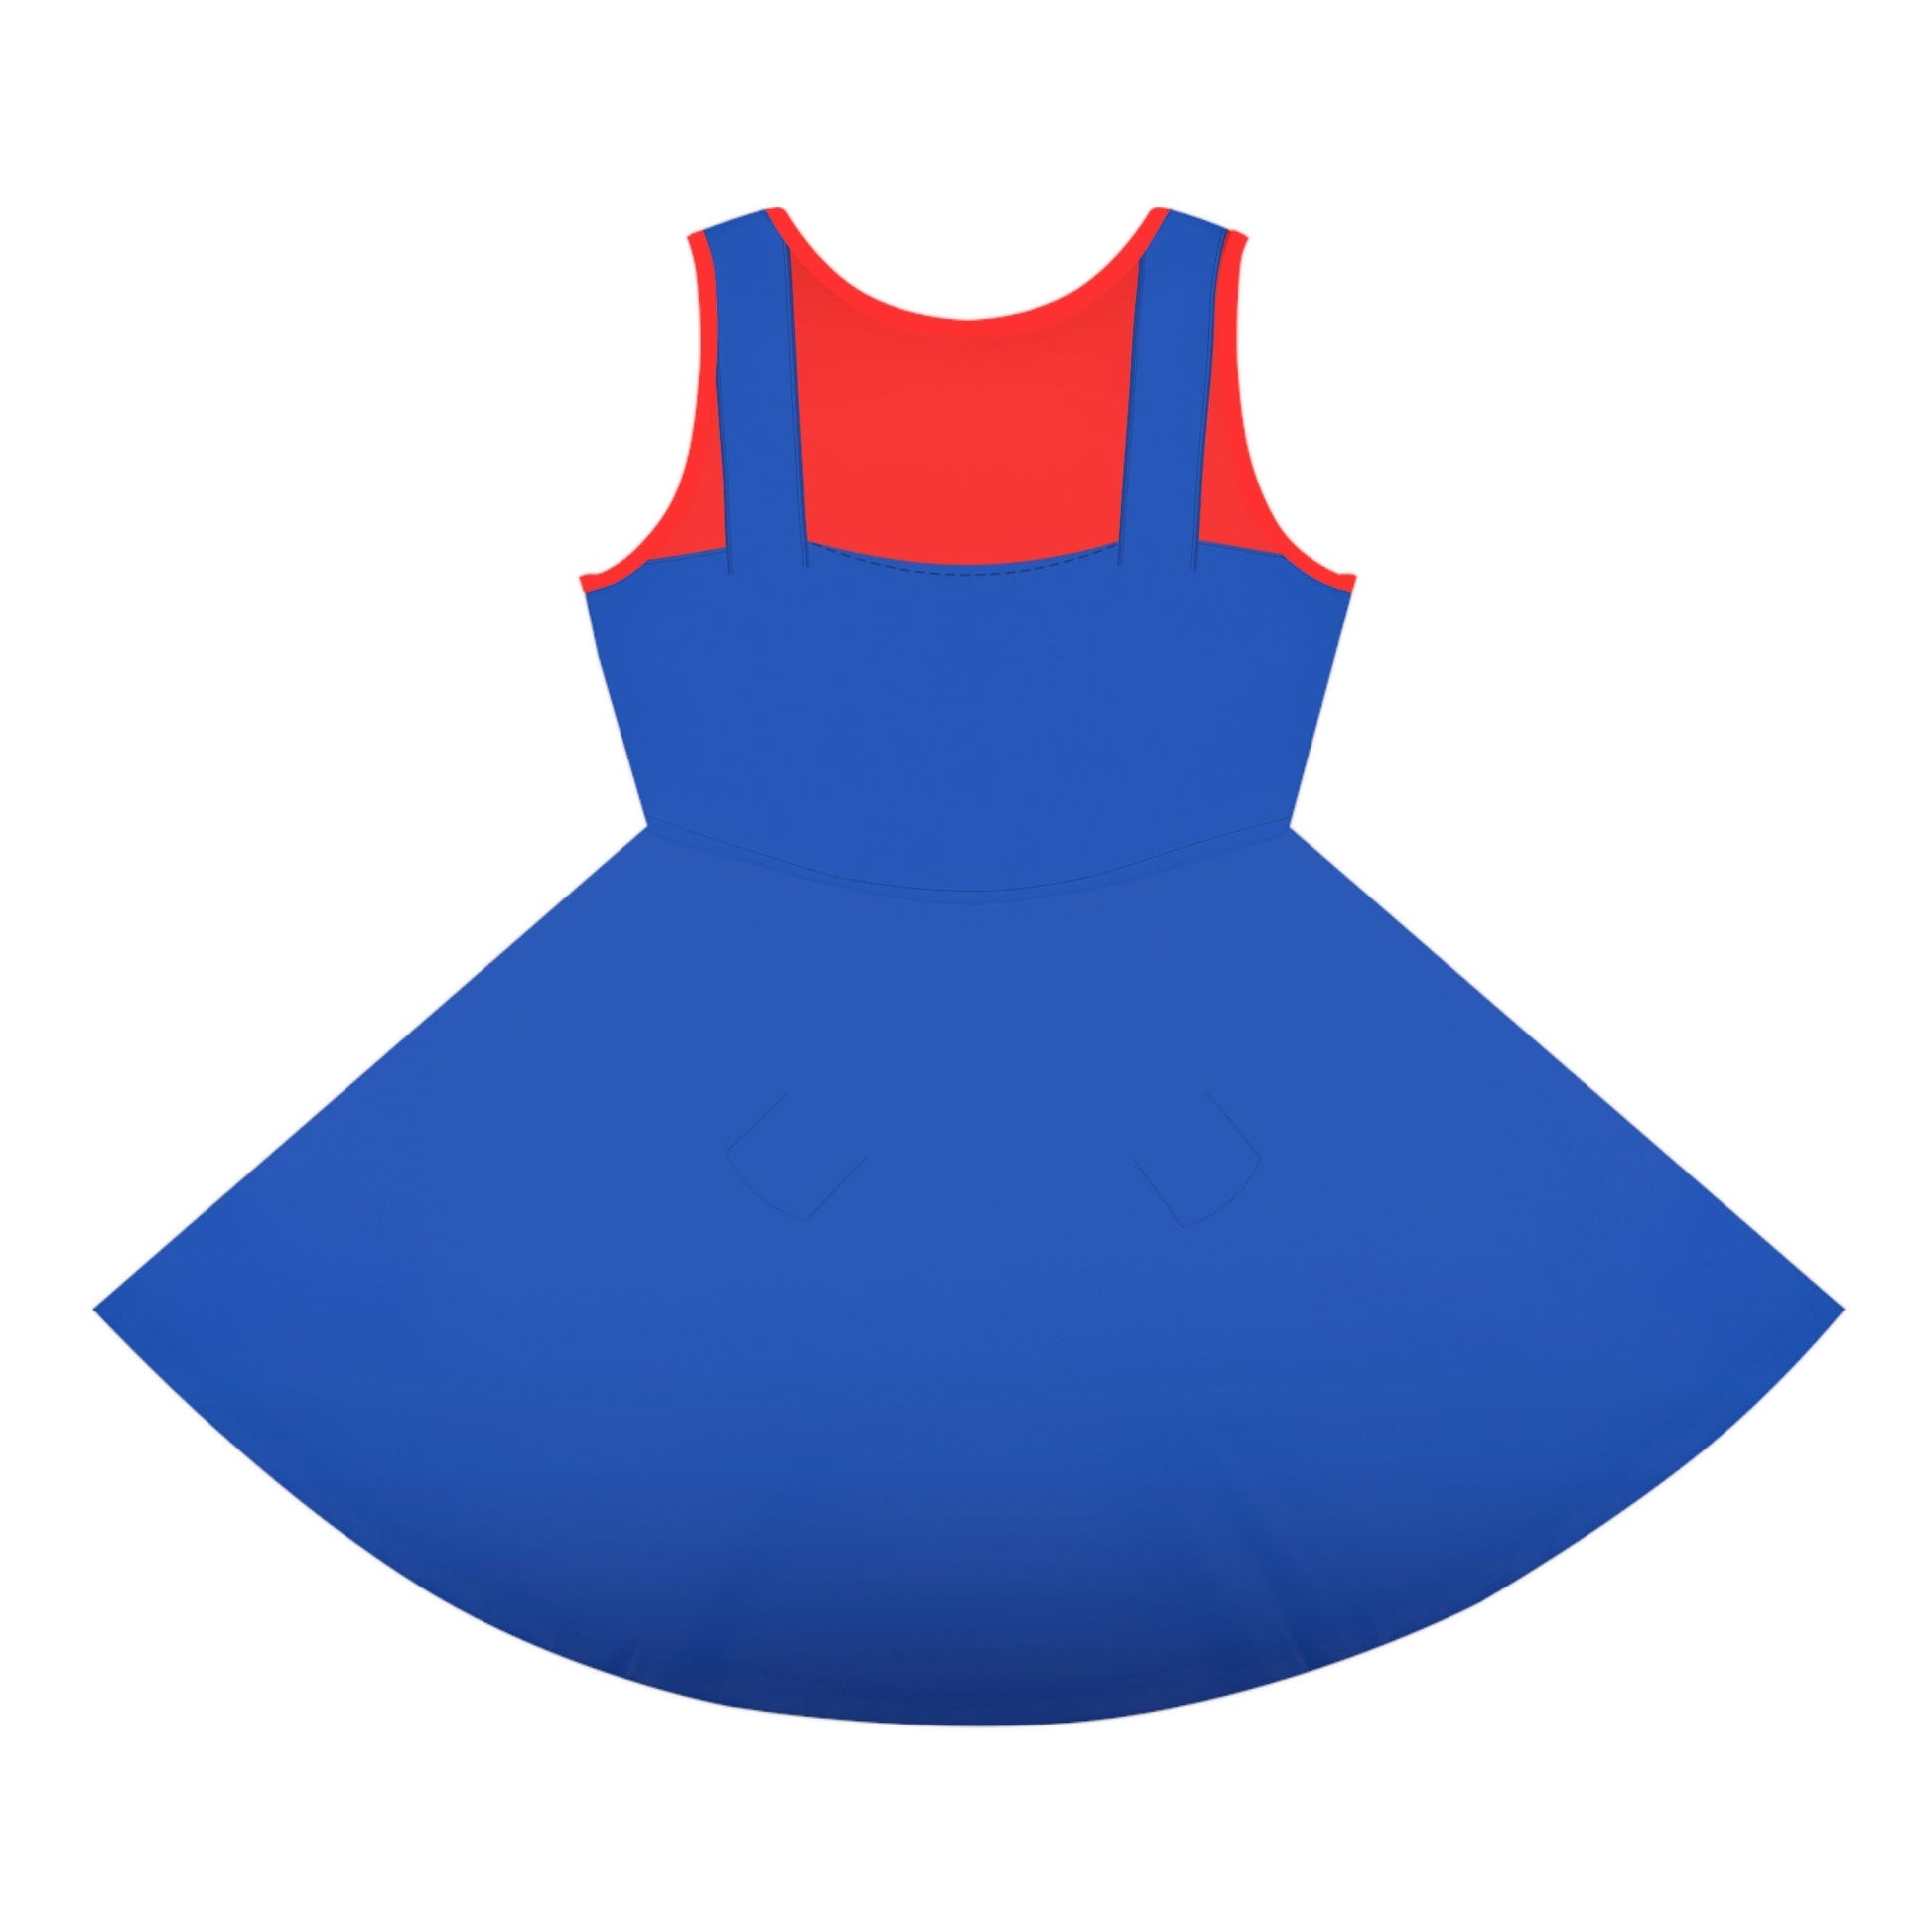 Red Video Game Guy Girls' Sleeveless Sundress All Over PrintAOPAOP Clothing#tag4##tag5##tag6#